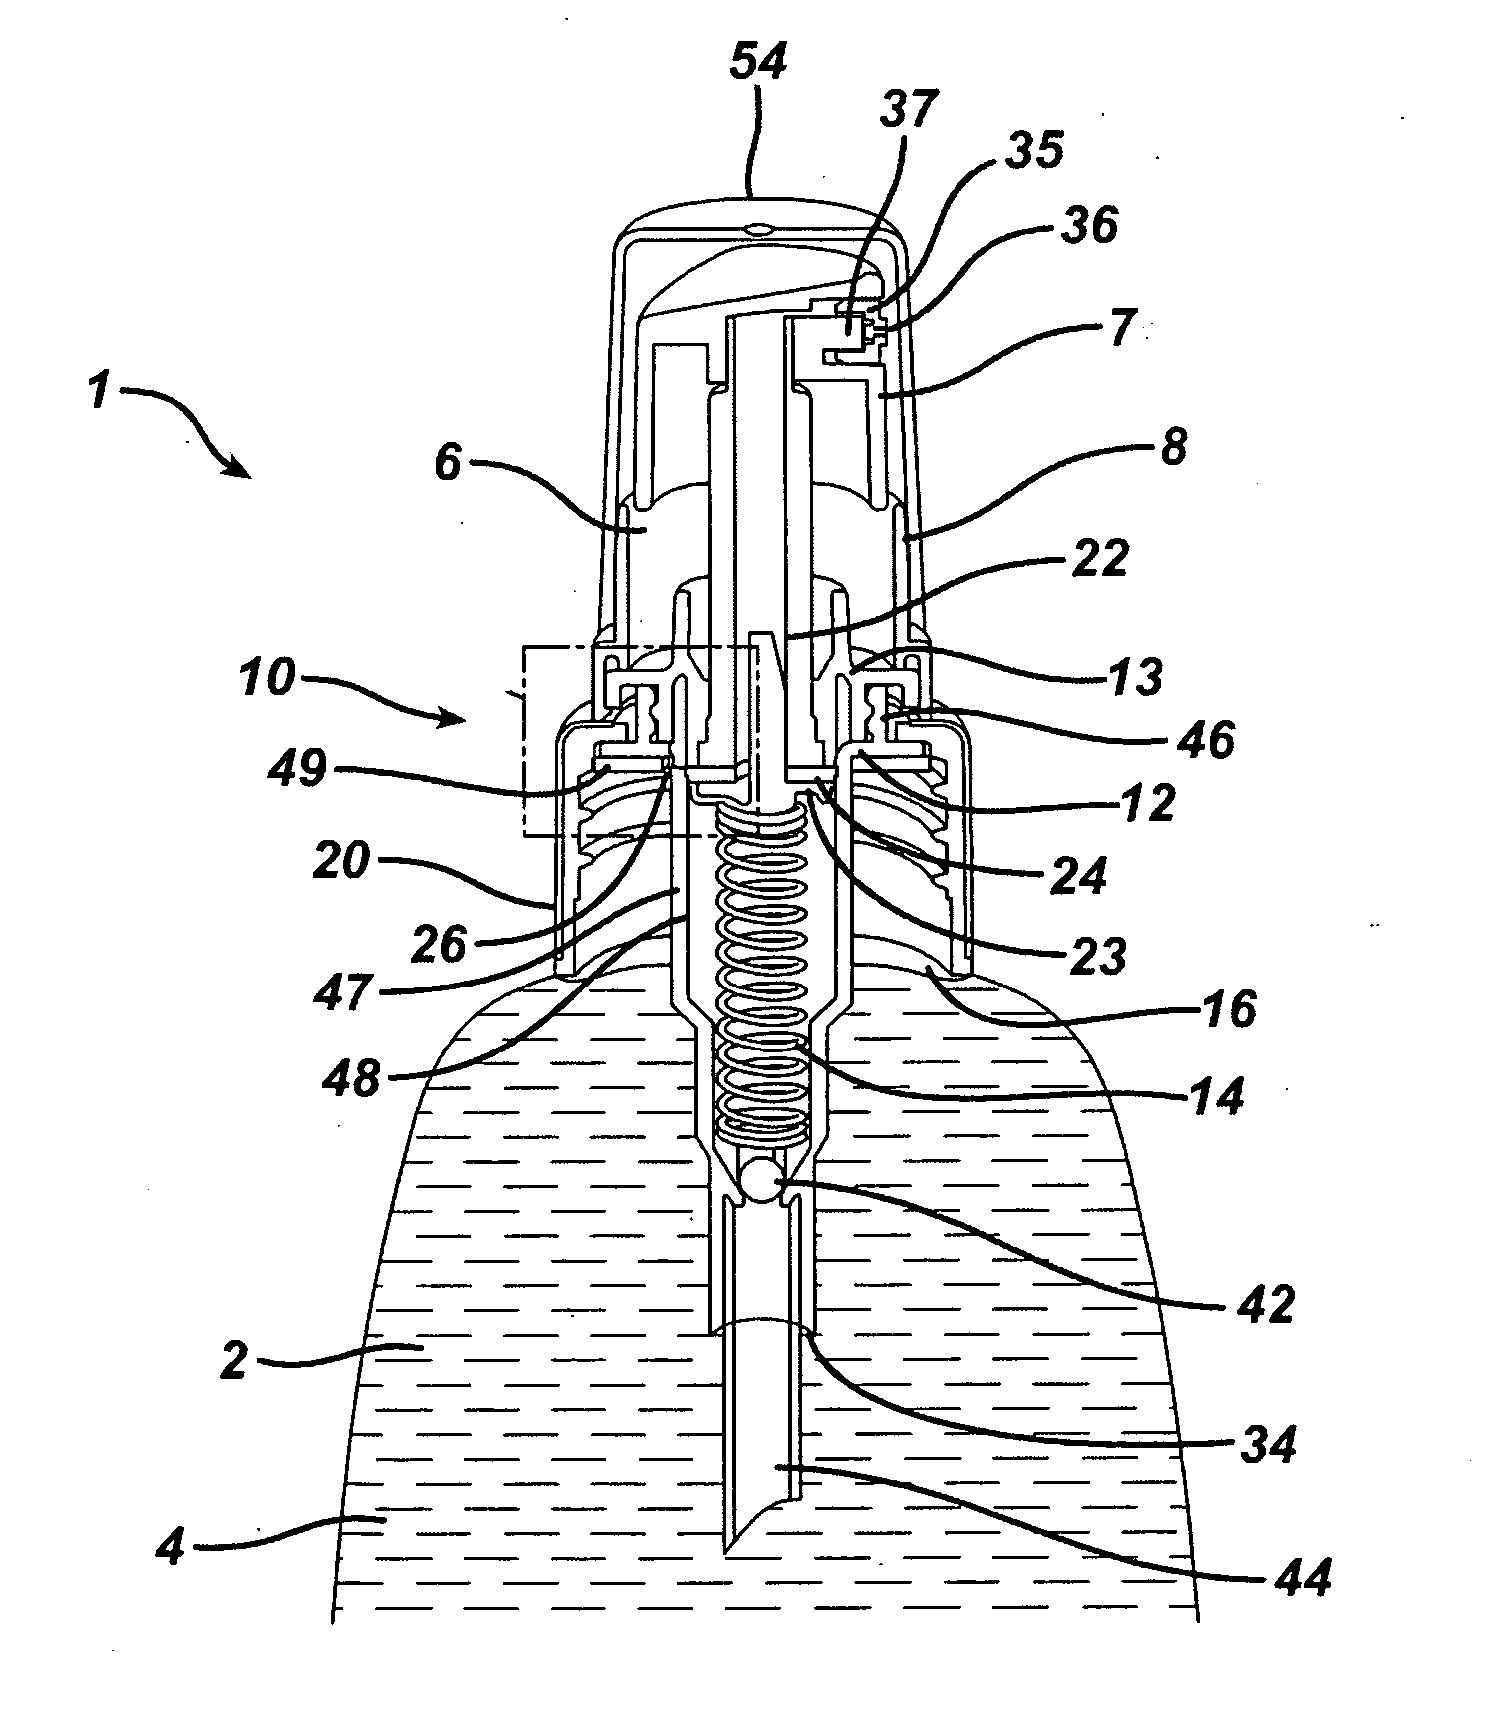 Product containing vegetable oil and dispensing article